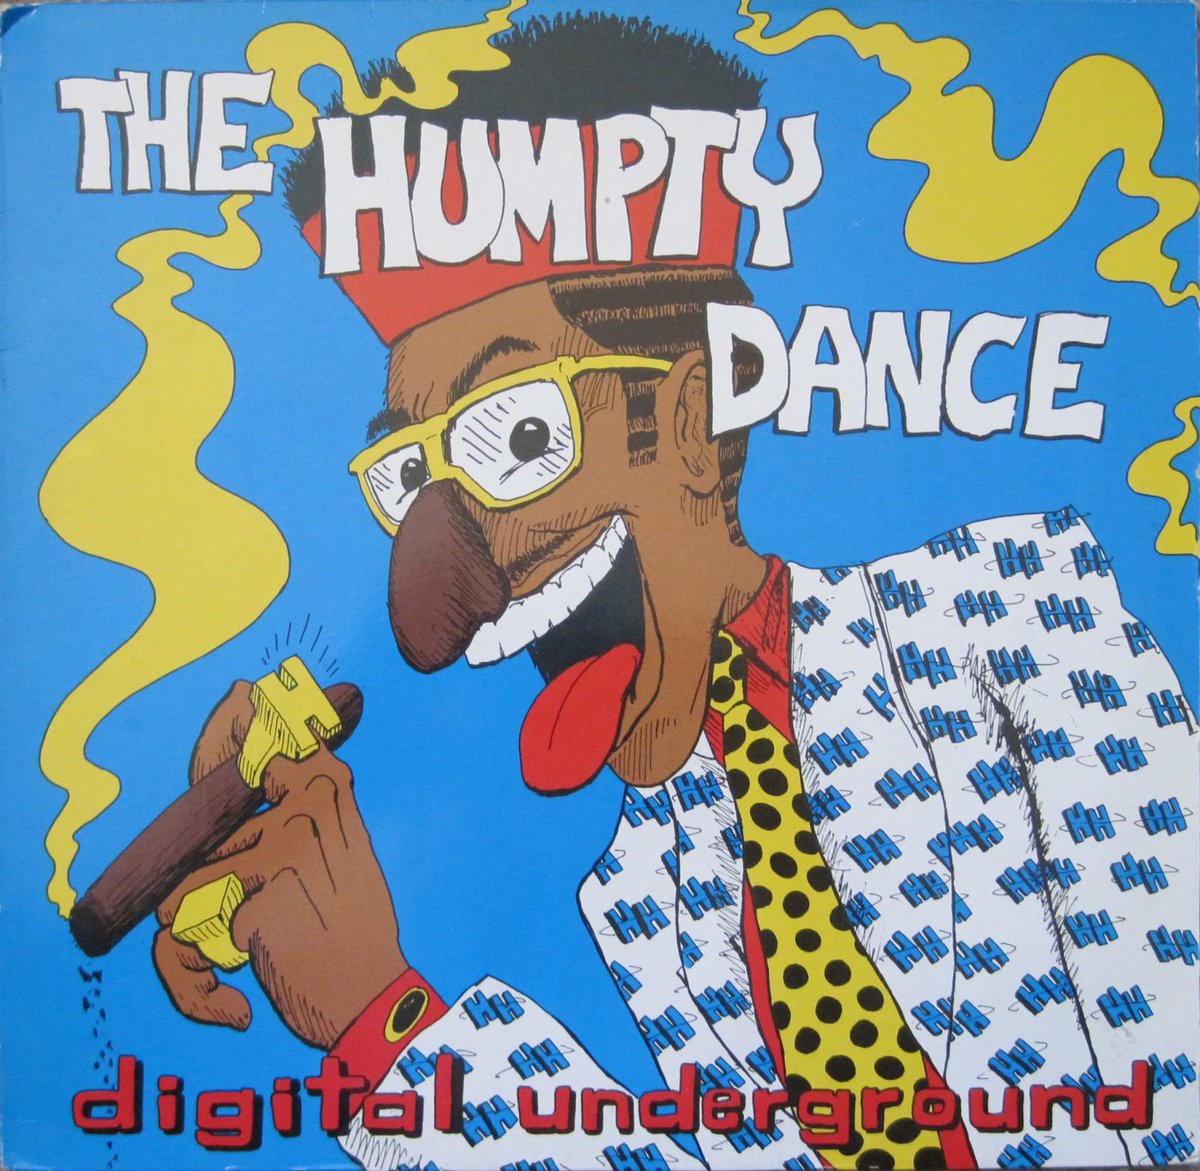 27years ago today, @HumptyFunk aka #DigitalUnderground released the #classic single #HumptyDance off their album:#SexPackets! #TodayInHipHop